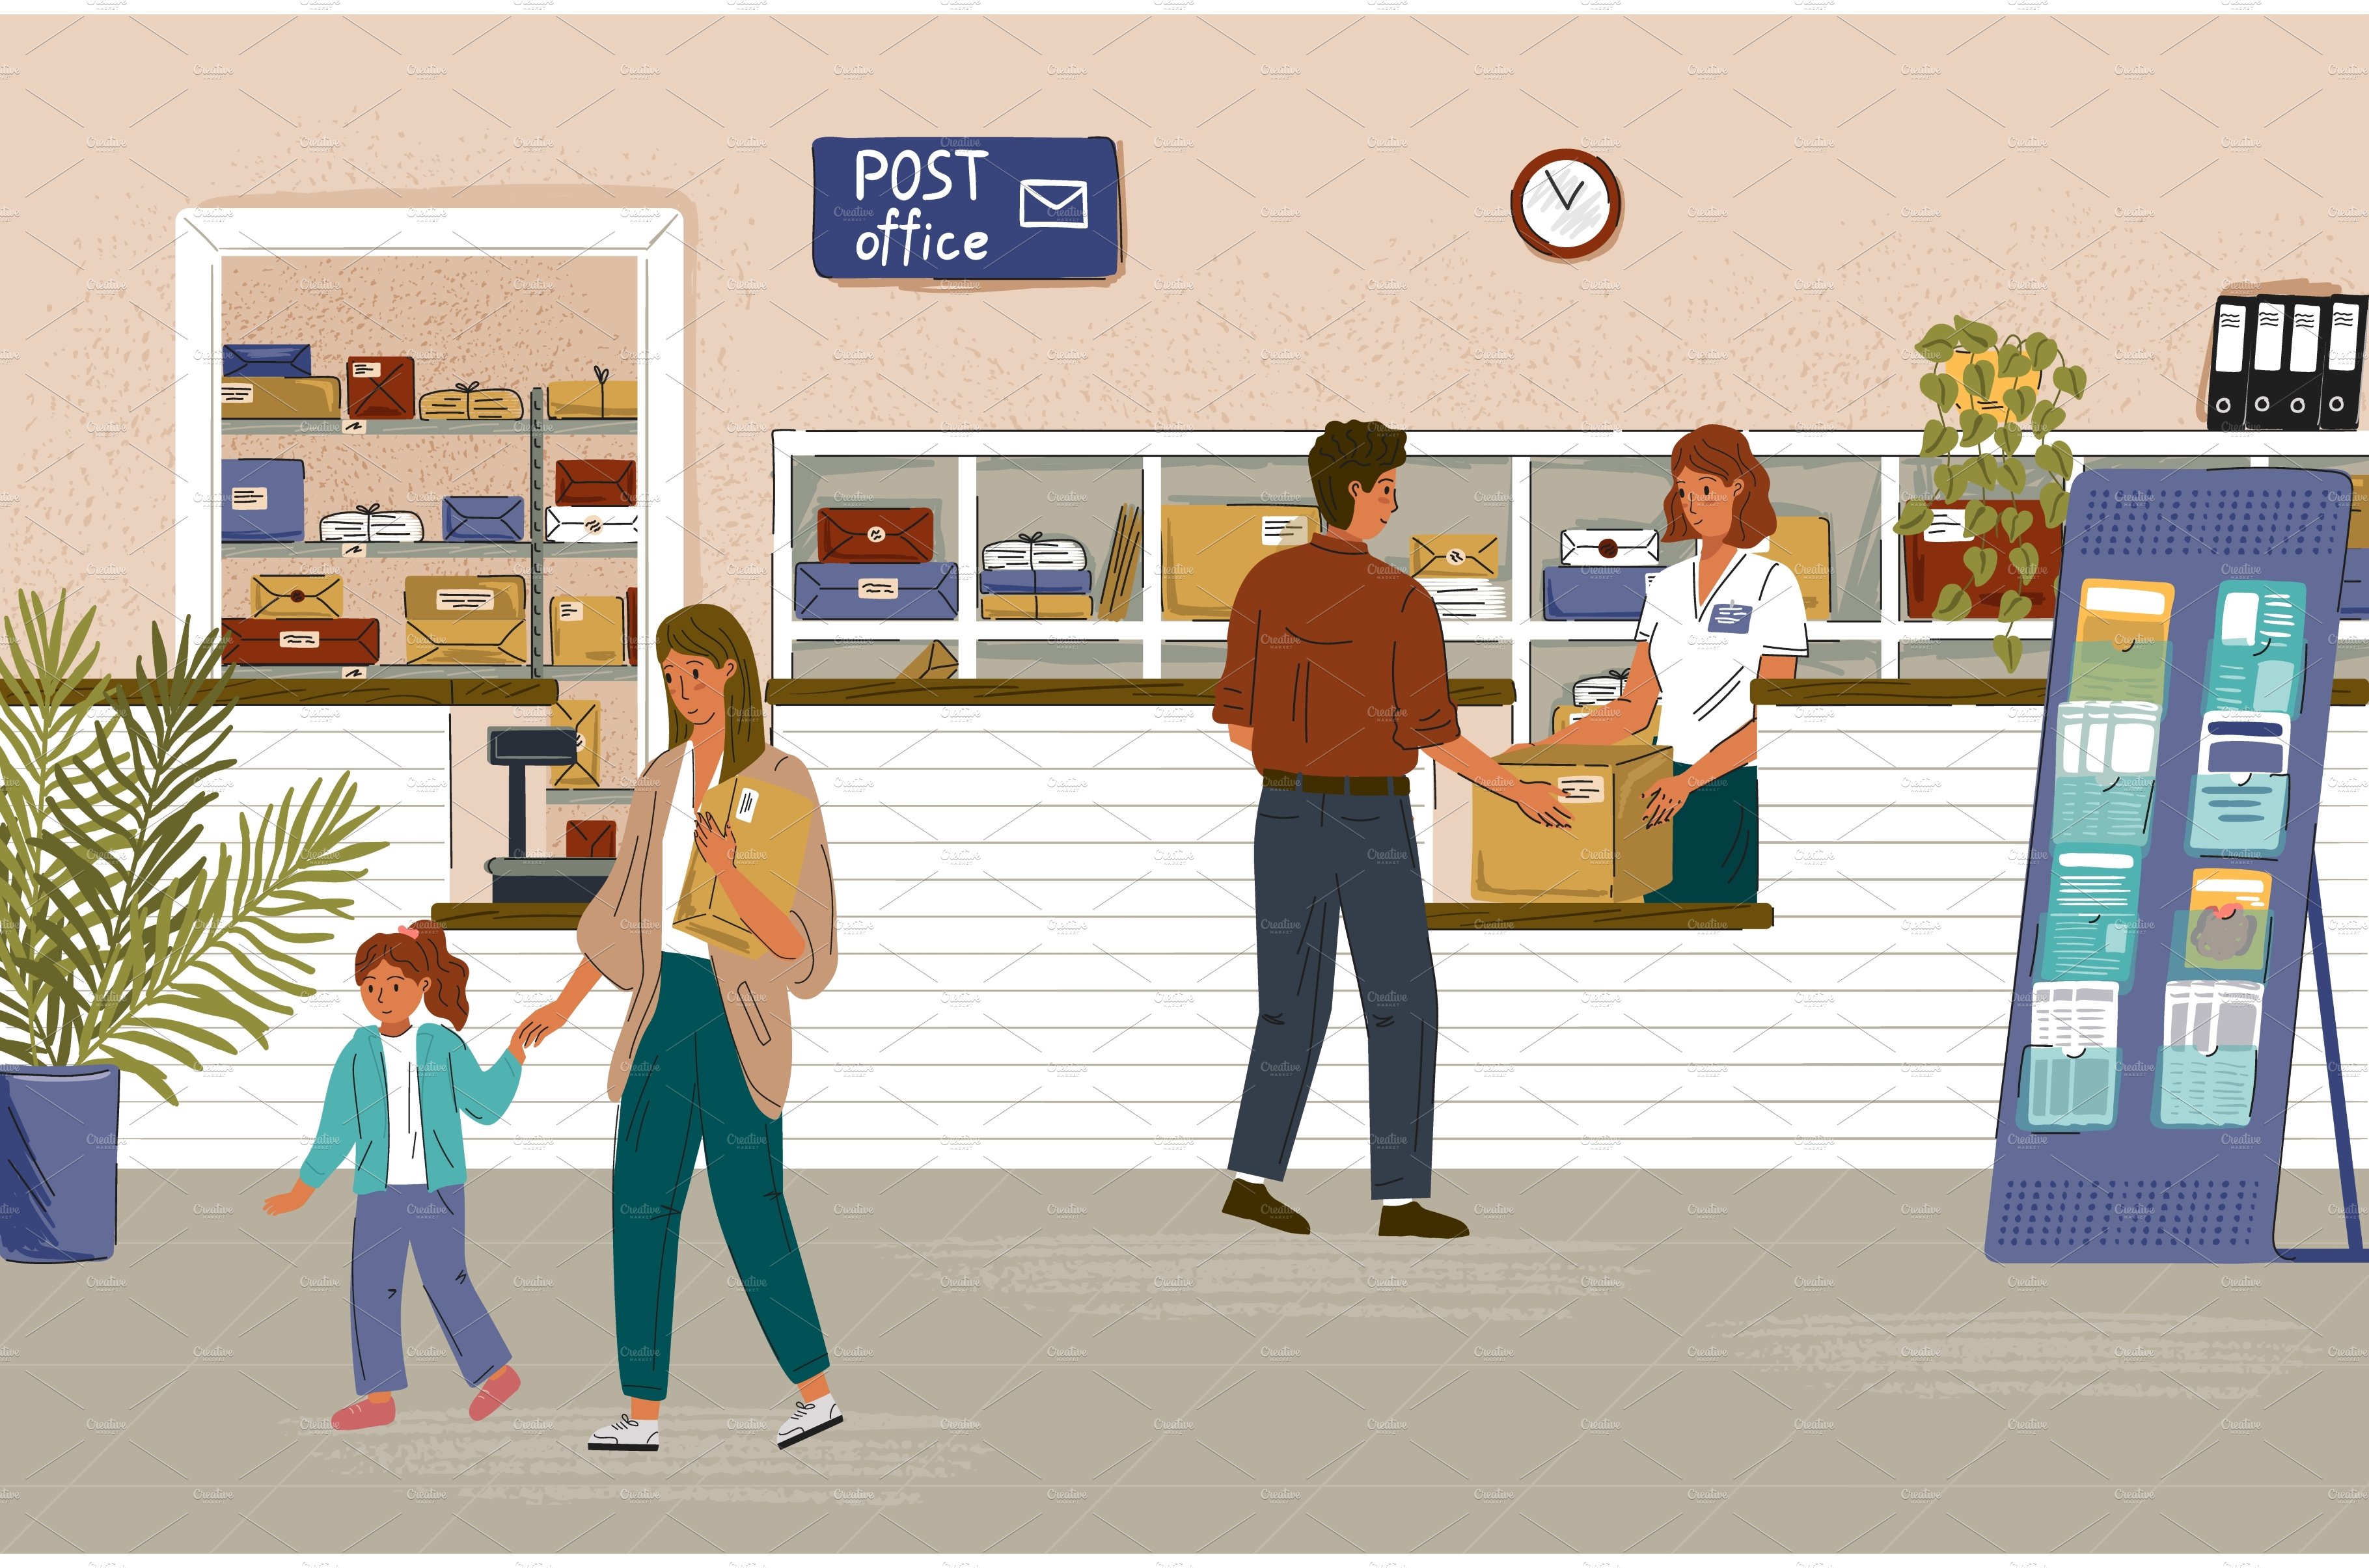 Post office interior concept vector cover image.